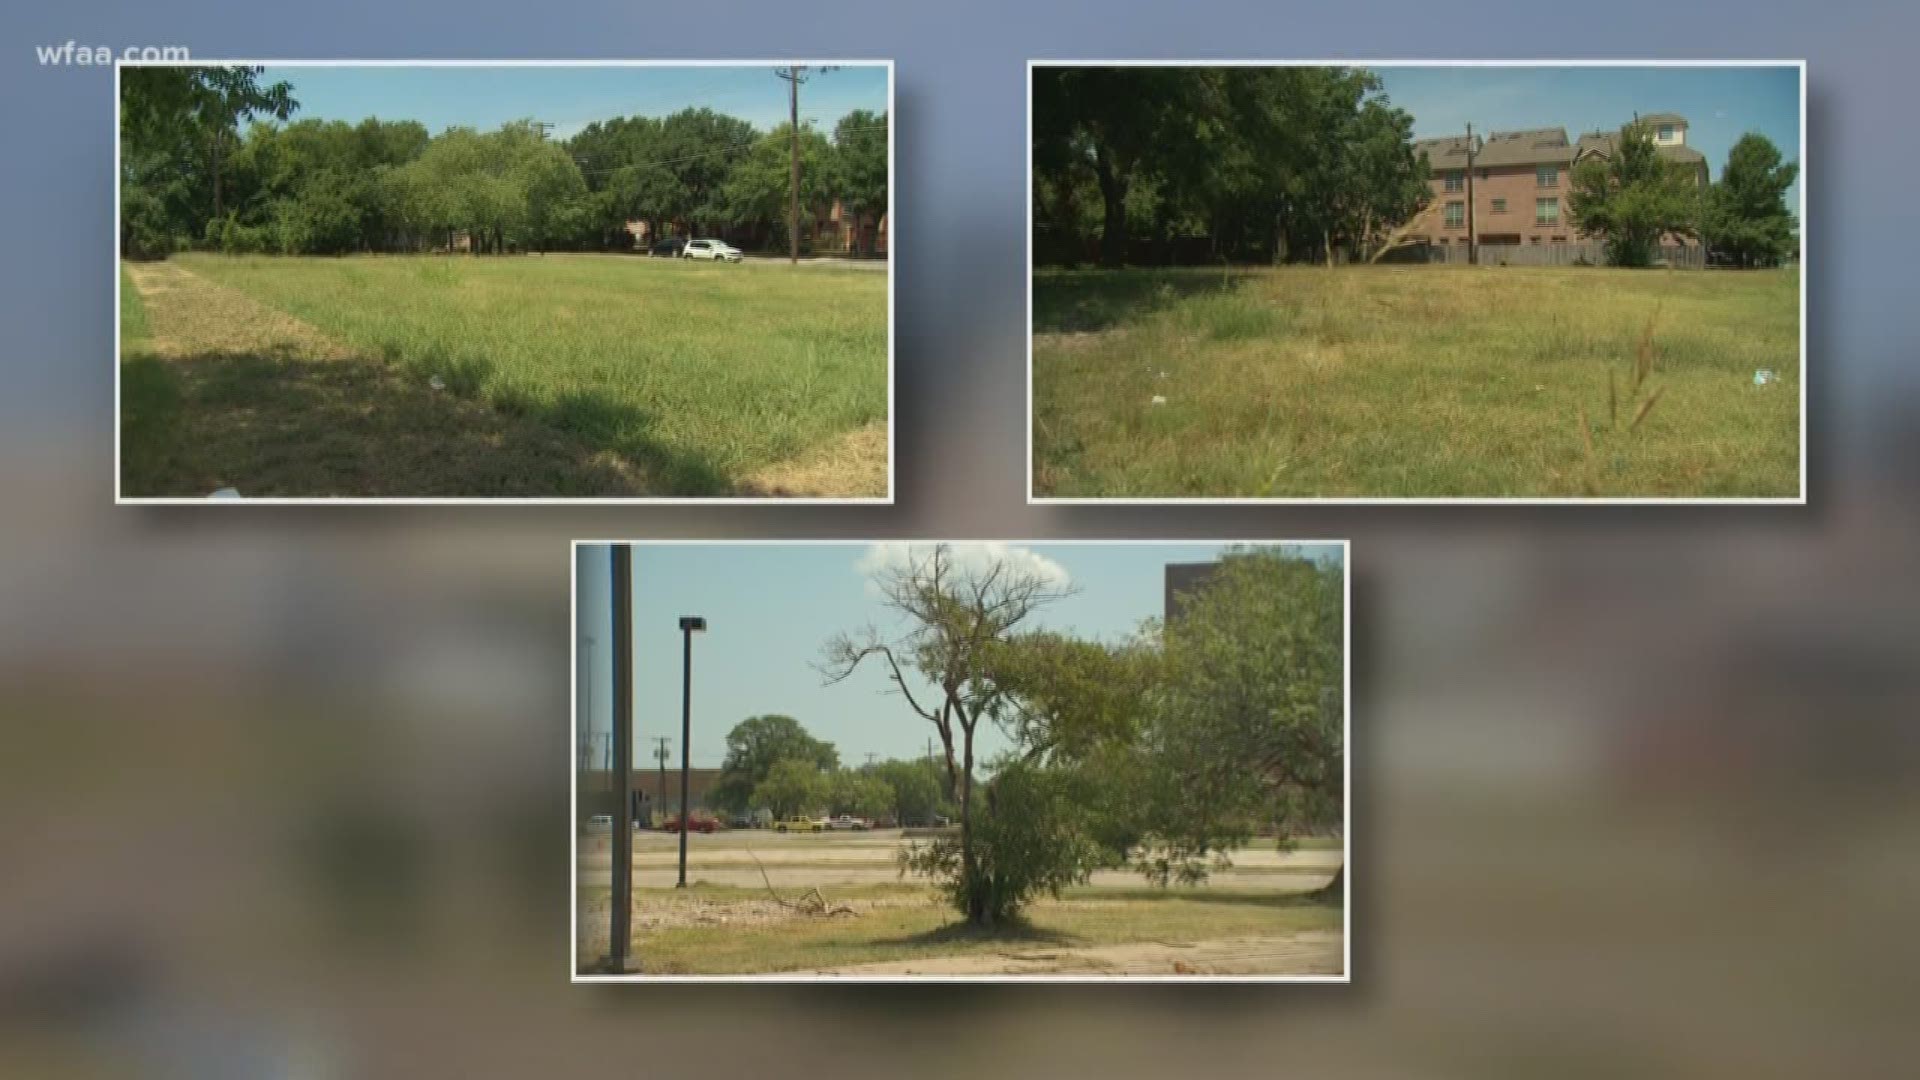 City leaders and community members are discussing plans to turn vacant lots into affordable housing units in Dallas. The properties in question are located at the following addresses: 12000 Greenville Avenue, 2009 & 2011 N. Haskell Avenue and 1805 N. Haskell Avenue.